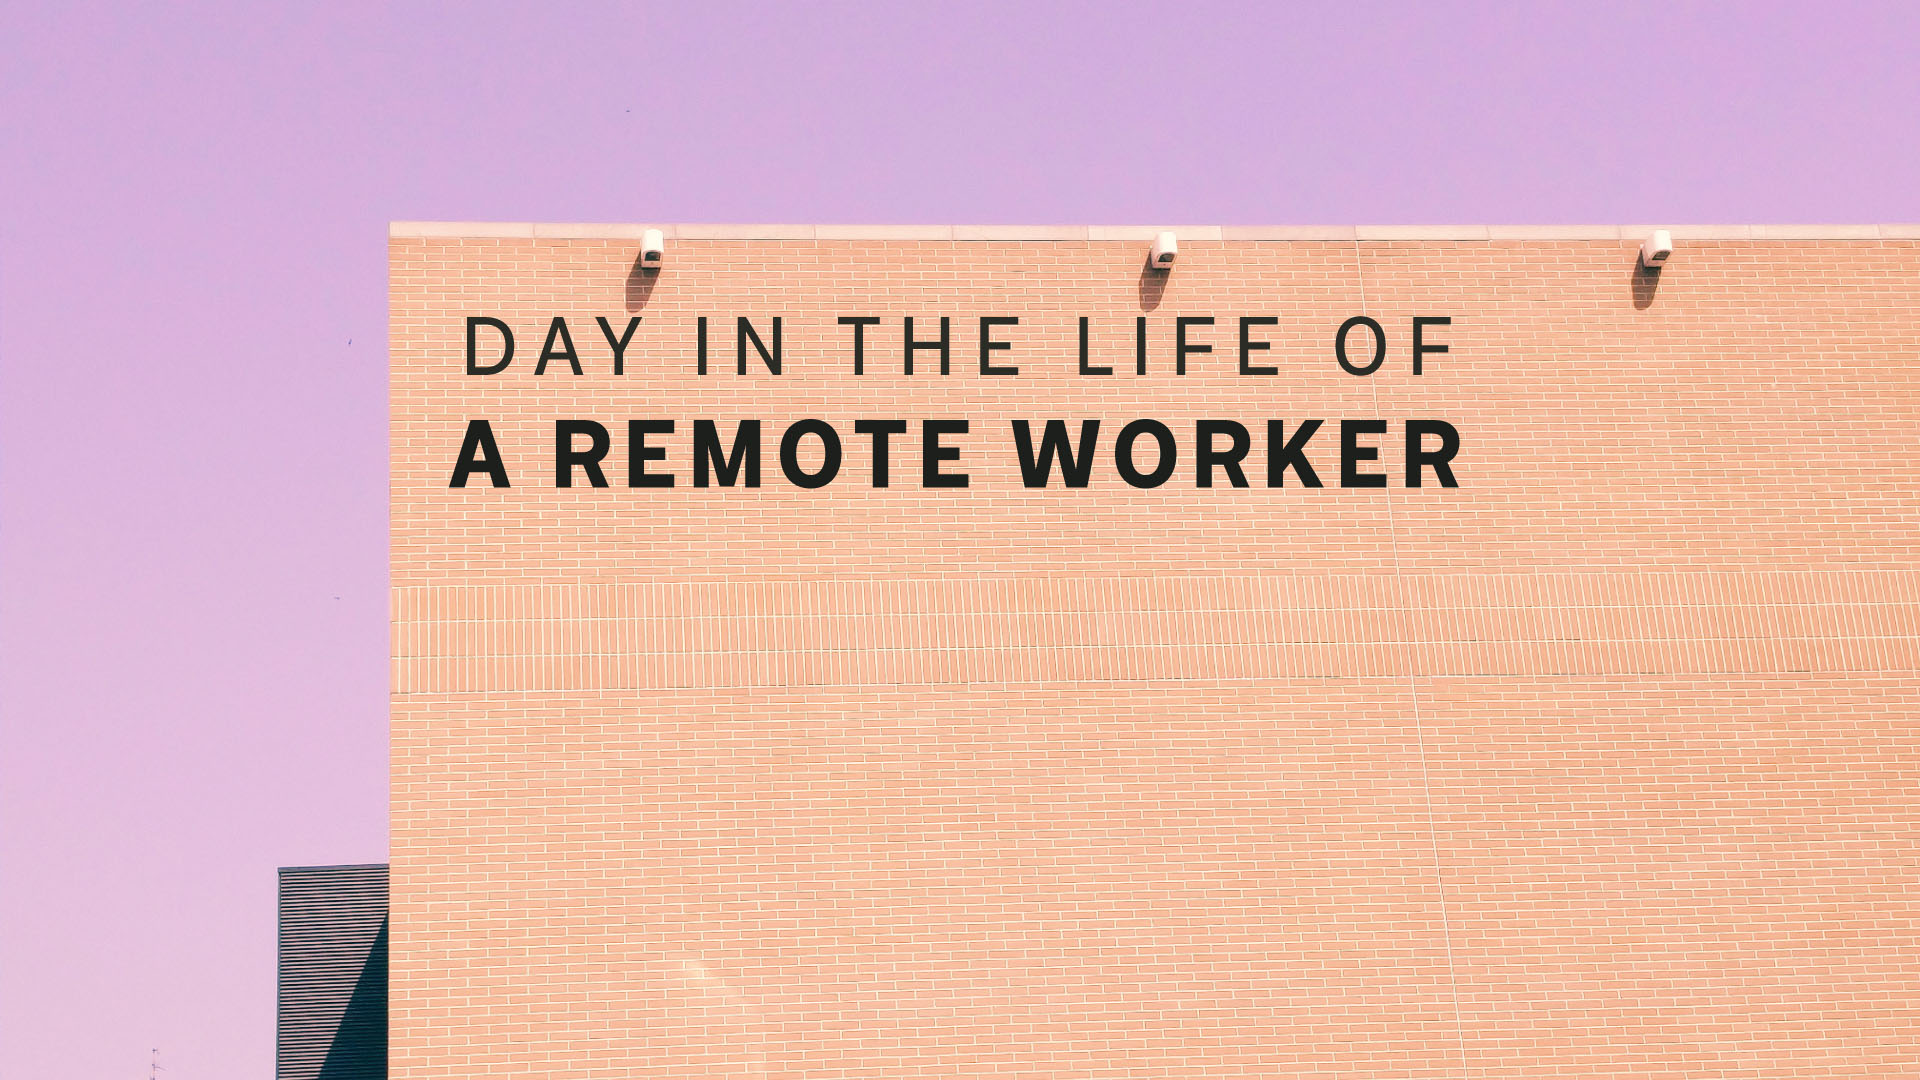 We Work Remotely day in the life interview with Scott Mathson